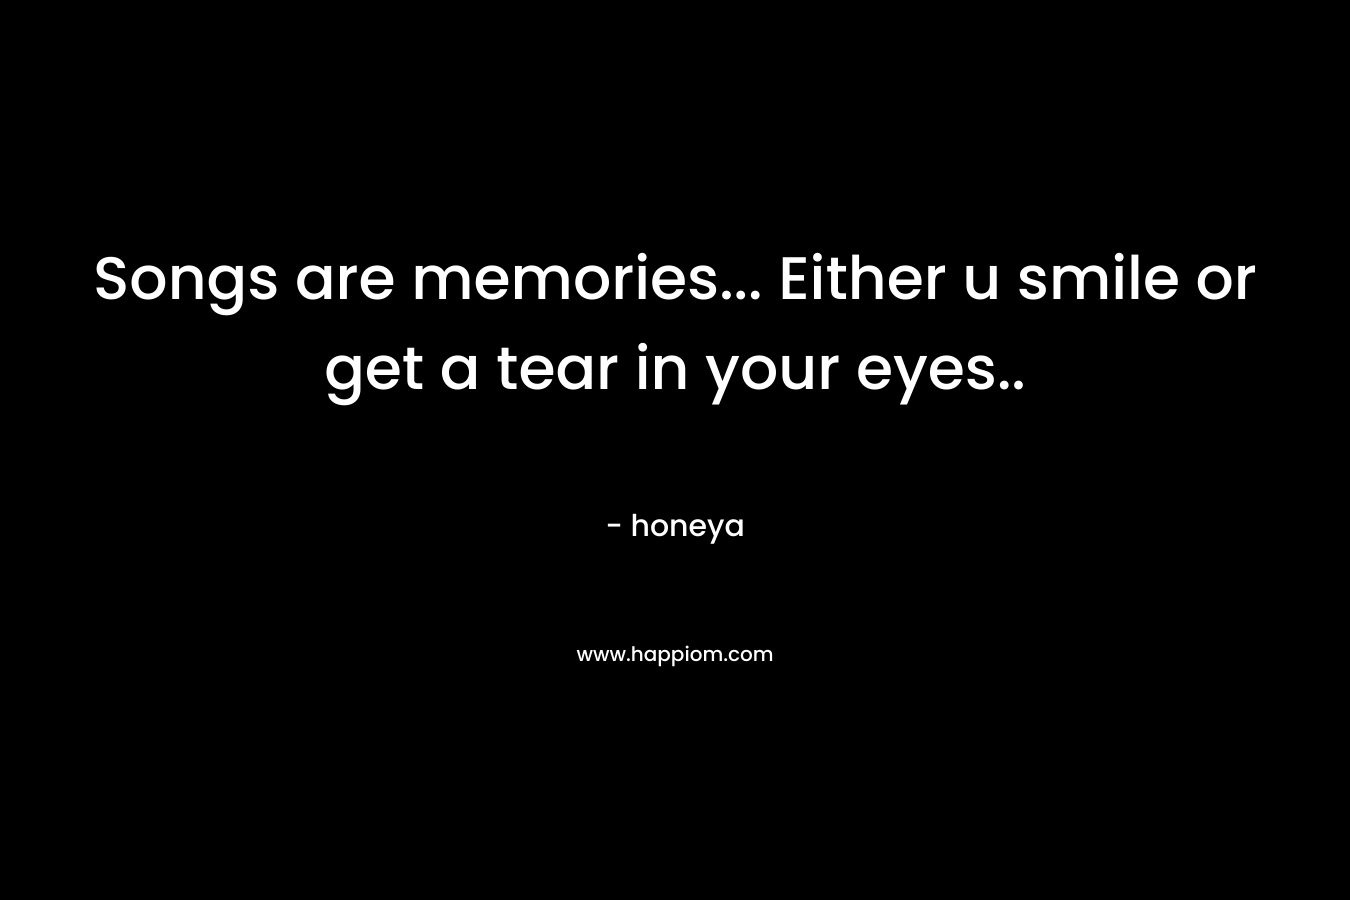 Songs are memories... Either u smile or get a tear in your eyes..